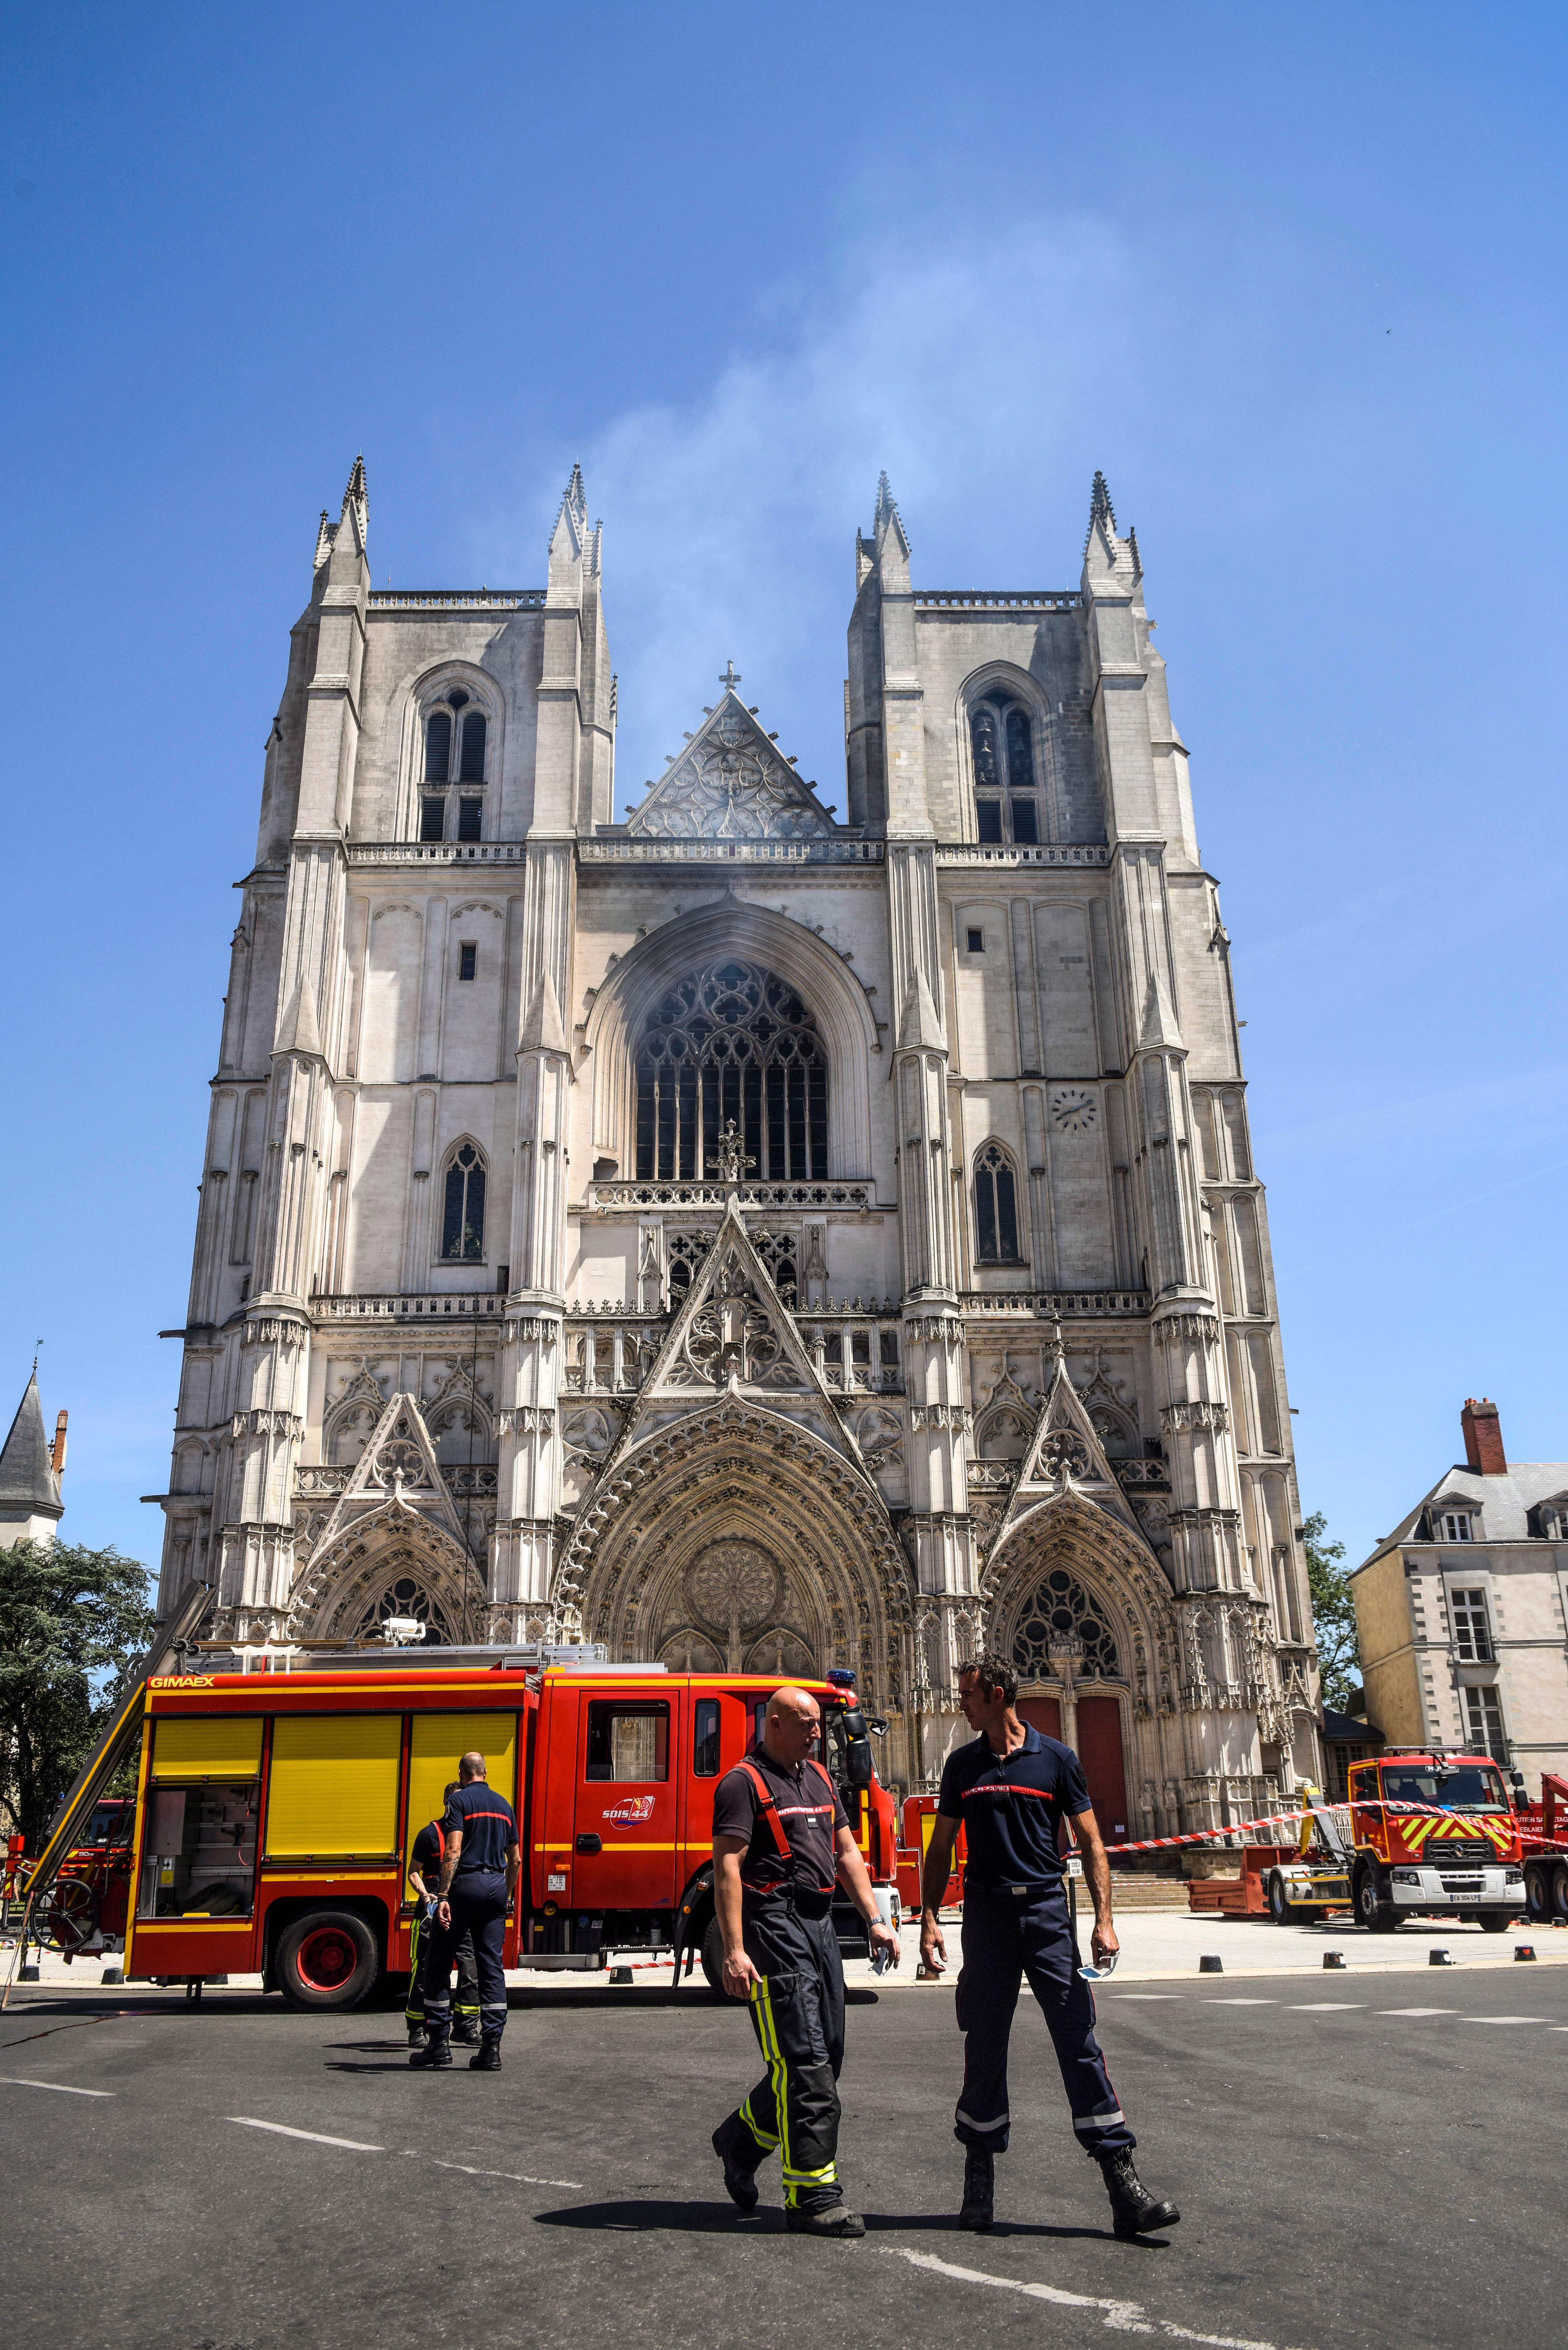 Firefighters are at work at the Cathedral of St Peter and St Paul in Nantes on July 18, 2020 after a fire ravaged parts of the gothic building before being brought under control, sparking an arson investigation and leaving Catholic officials lamenting the loss of priceless historical artefacts. (Photo by SEBASTIEN SALOM-GOMIS/AFP via Getty Images)